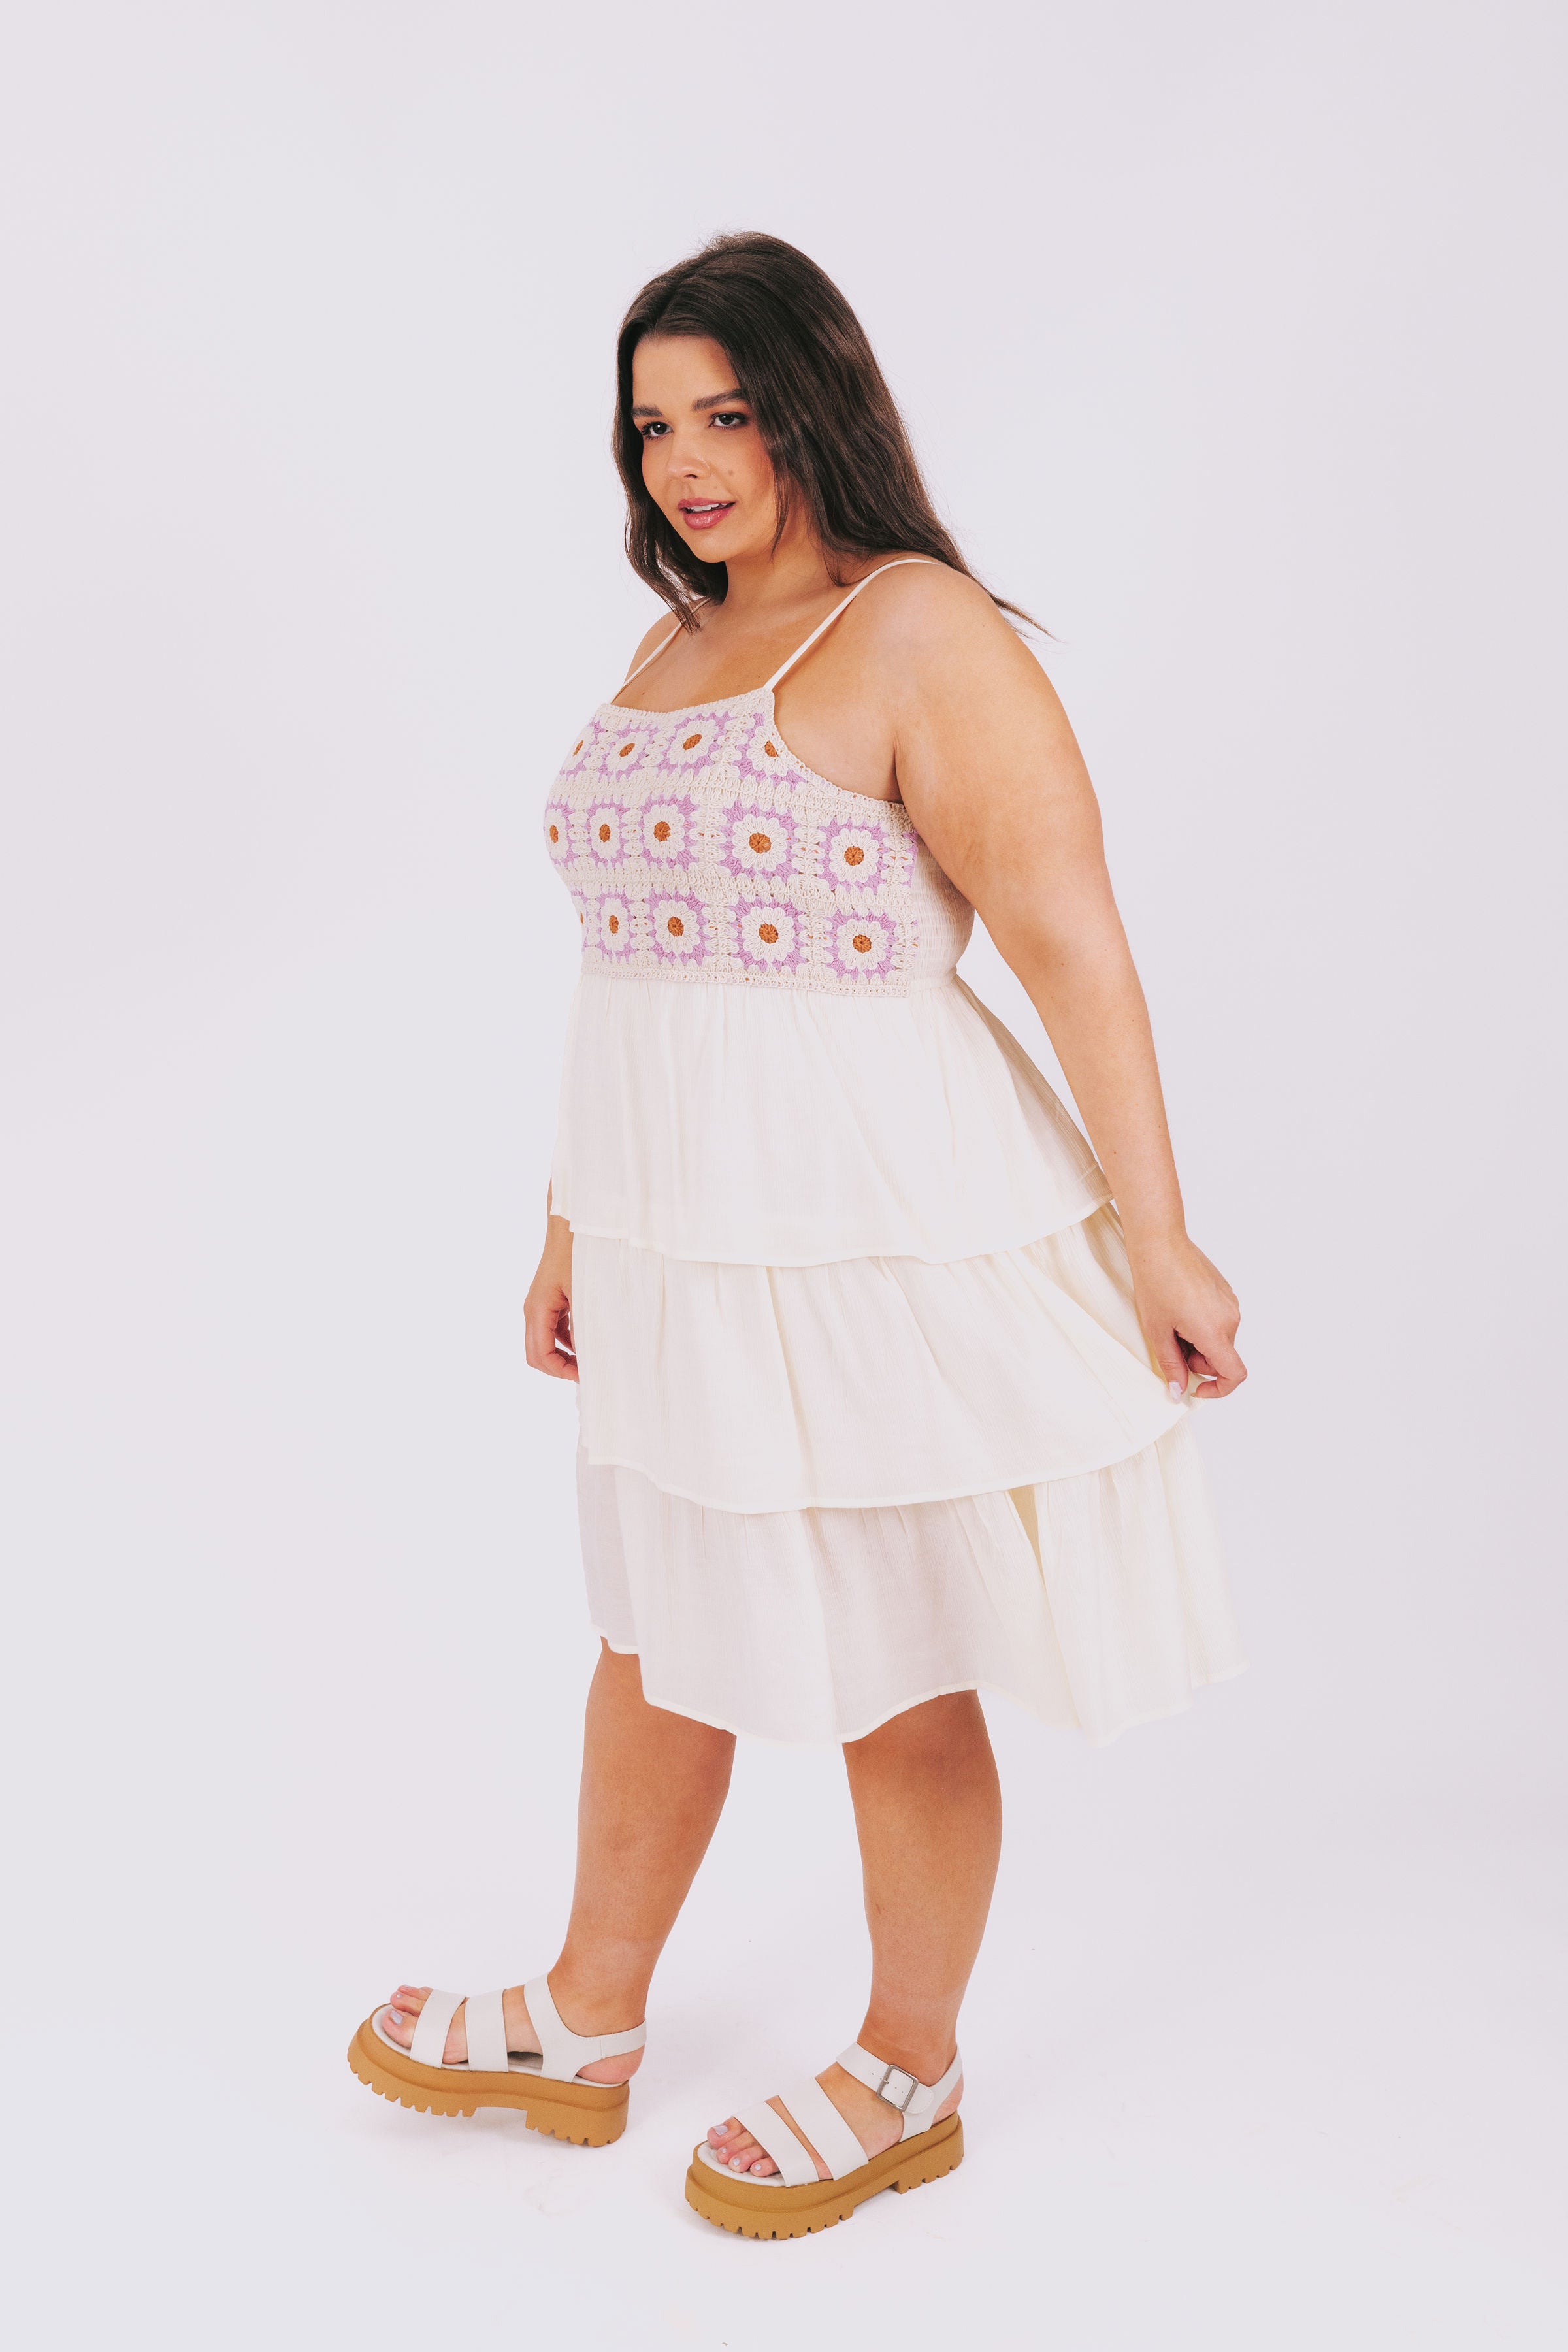 PLUS SIZE - Make A Difference Dress